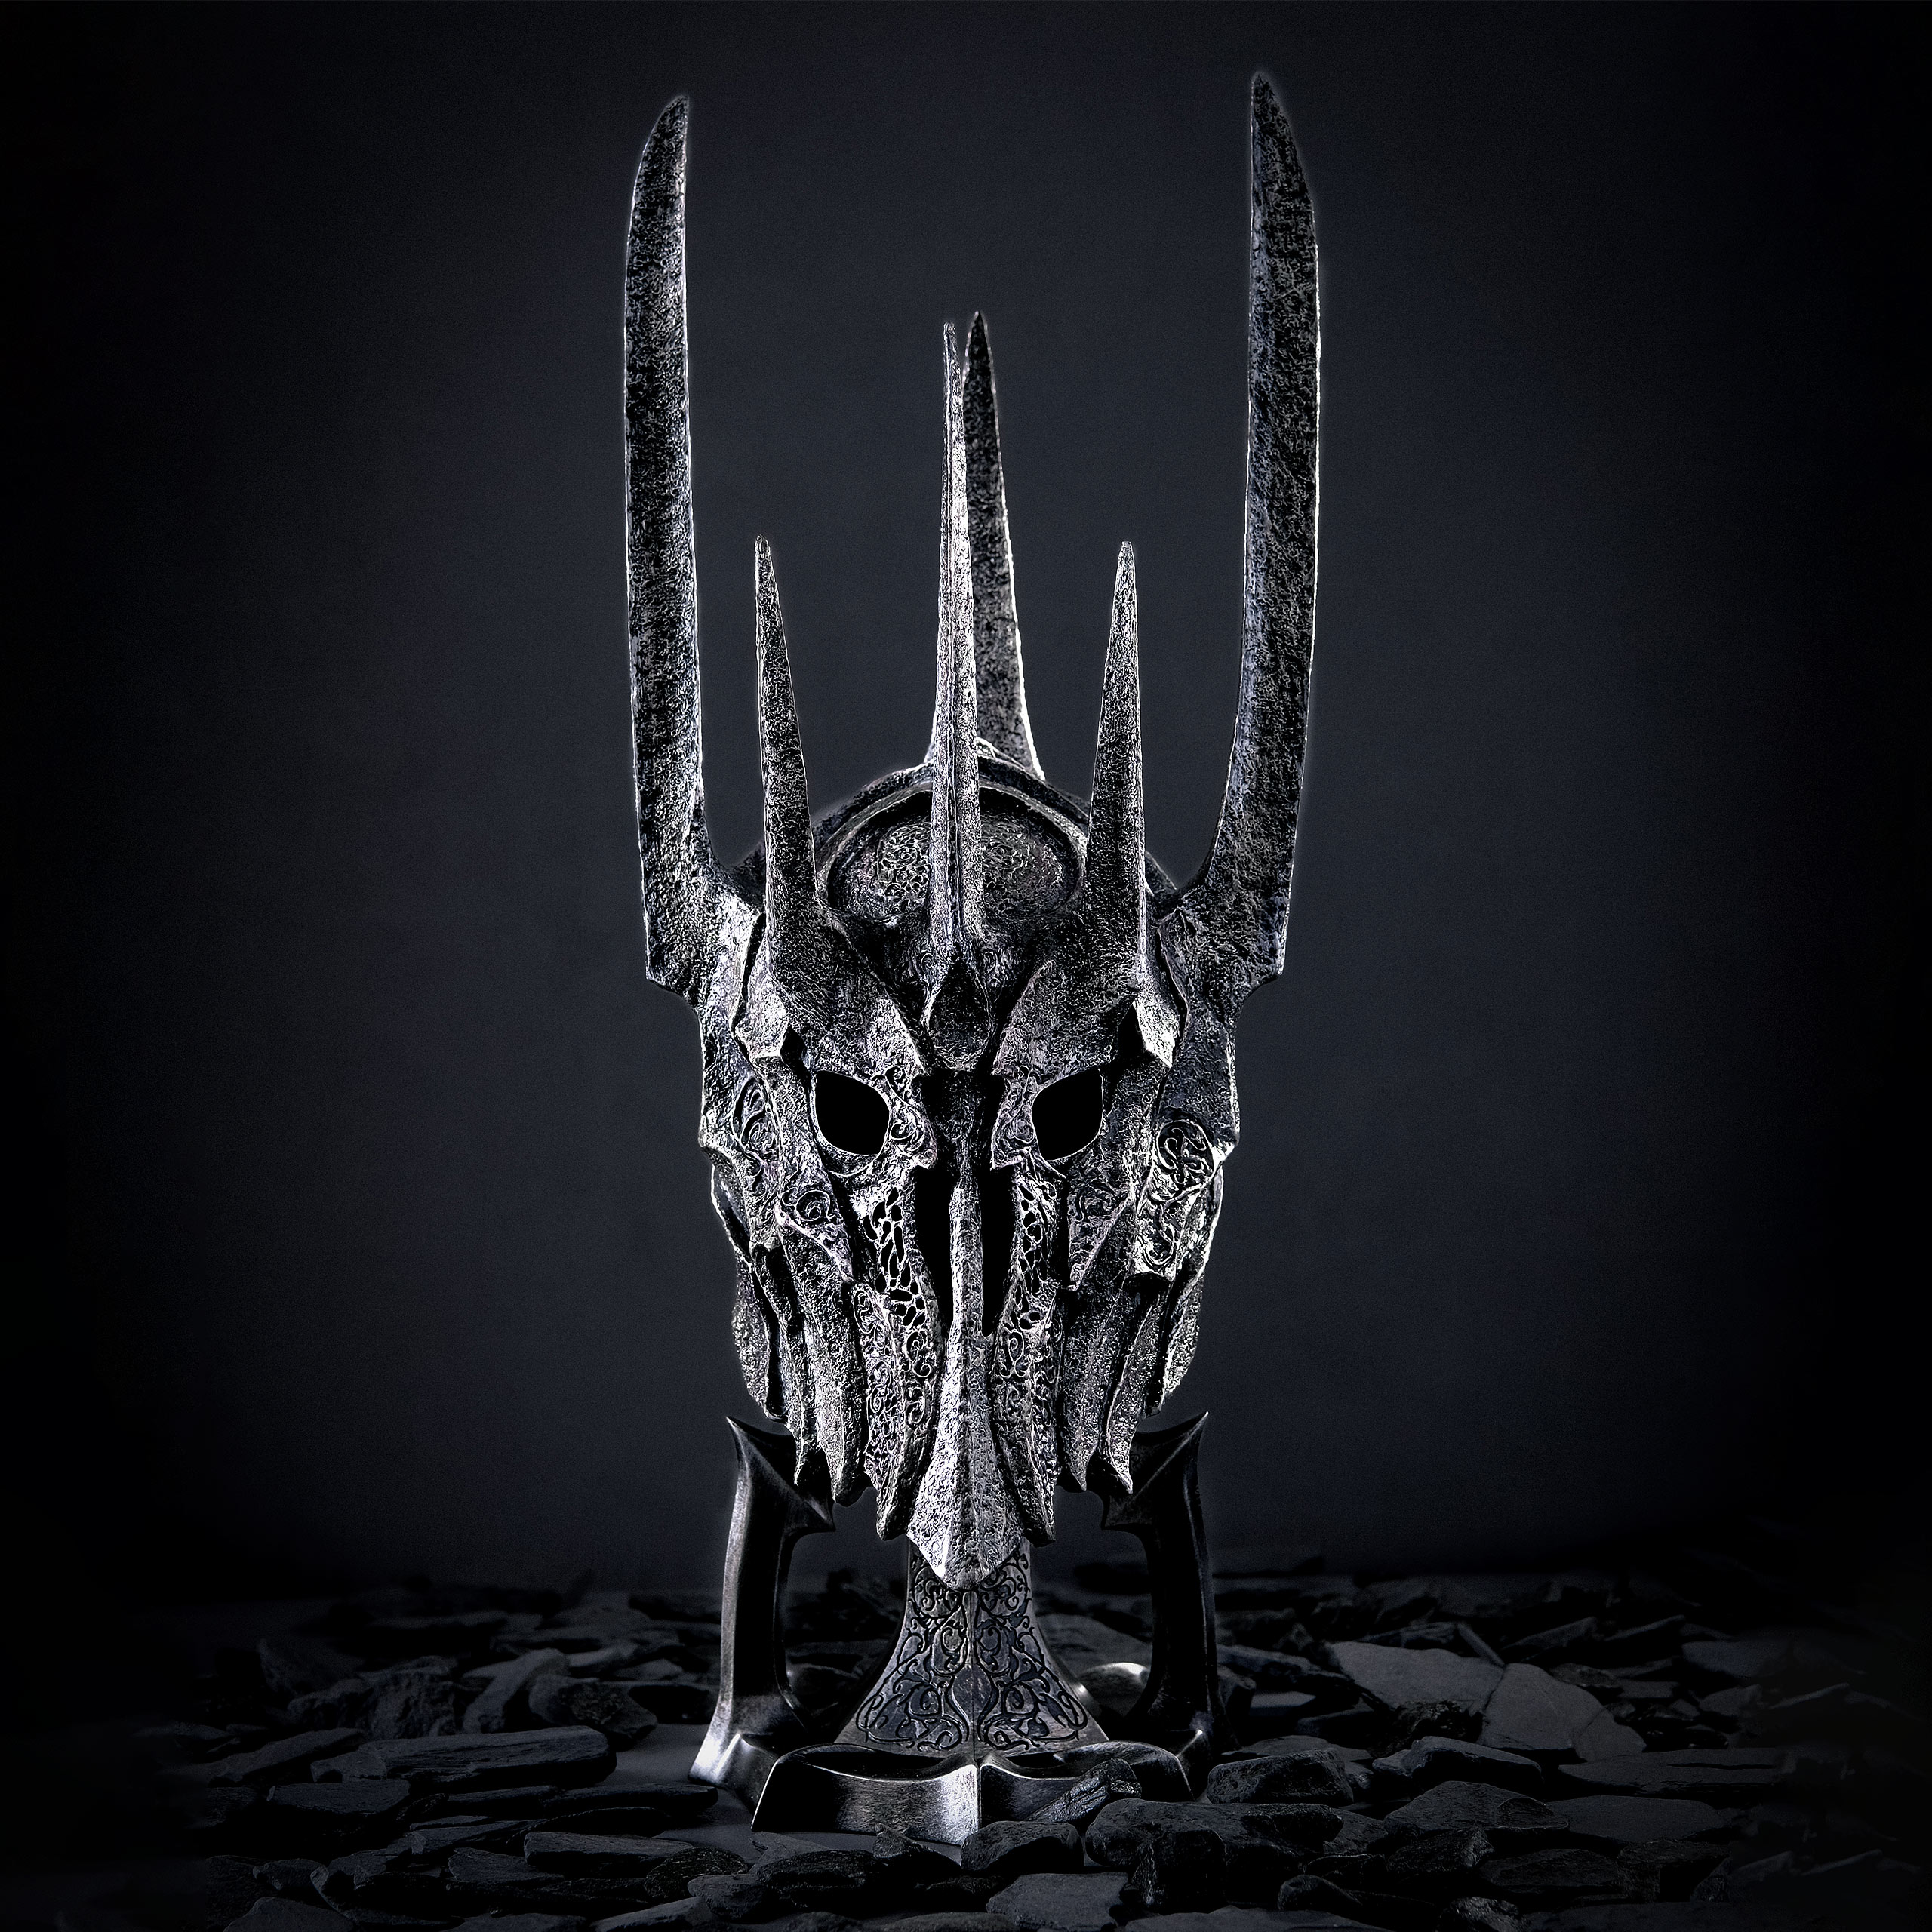 Sauron's Helmet Replica - Lord of the Rings